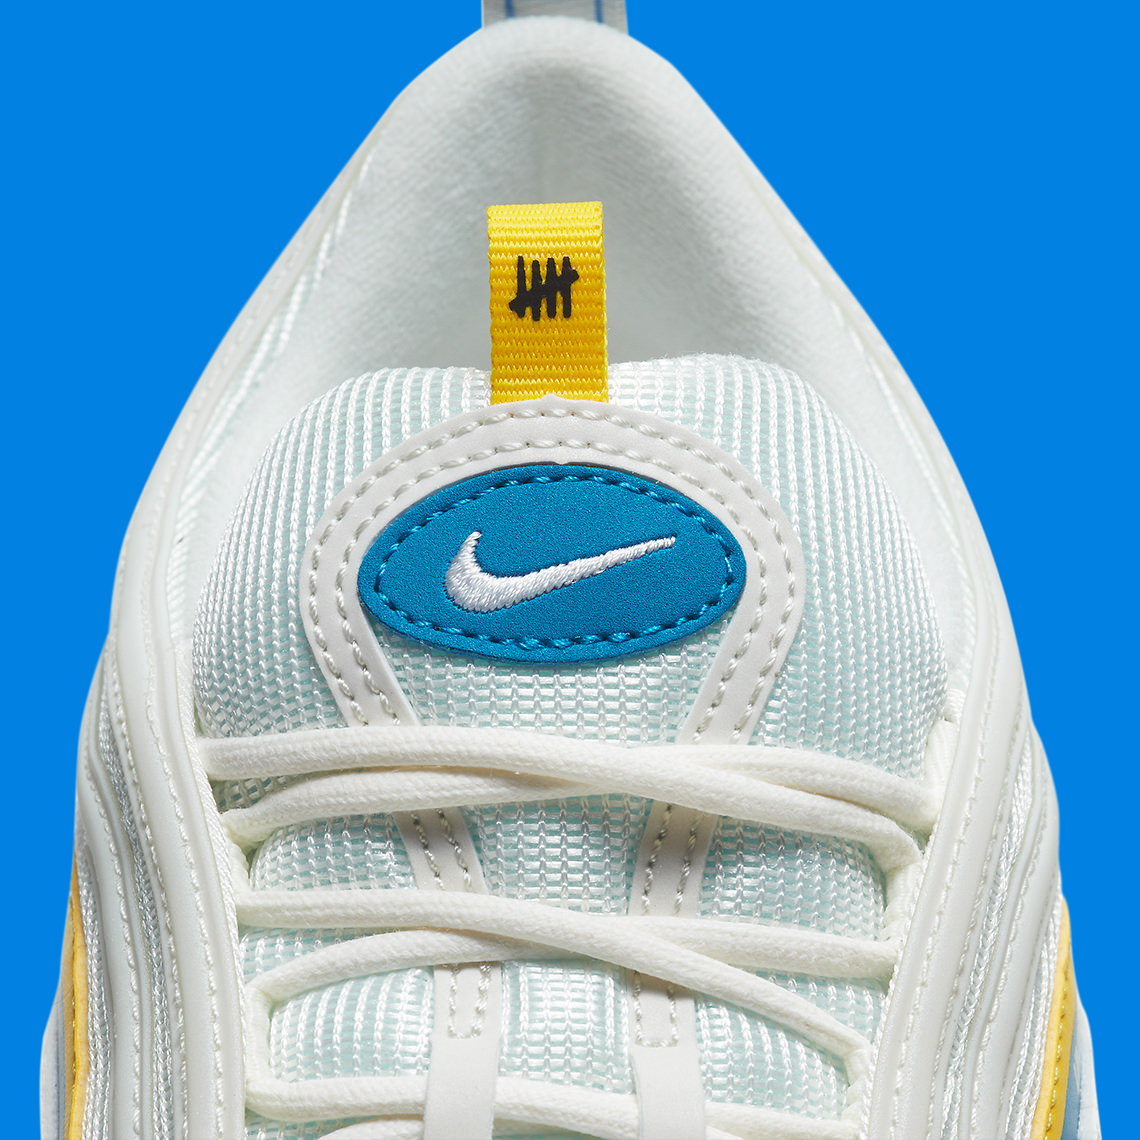 undefeated-nike-air-max-97-ucla-DC4830-100-release-date-9